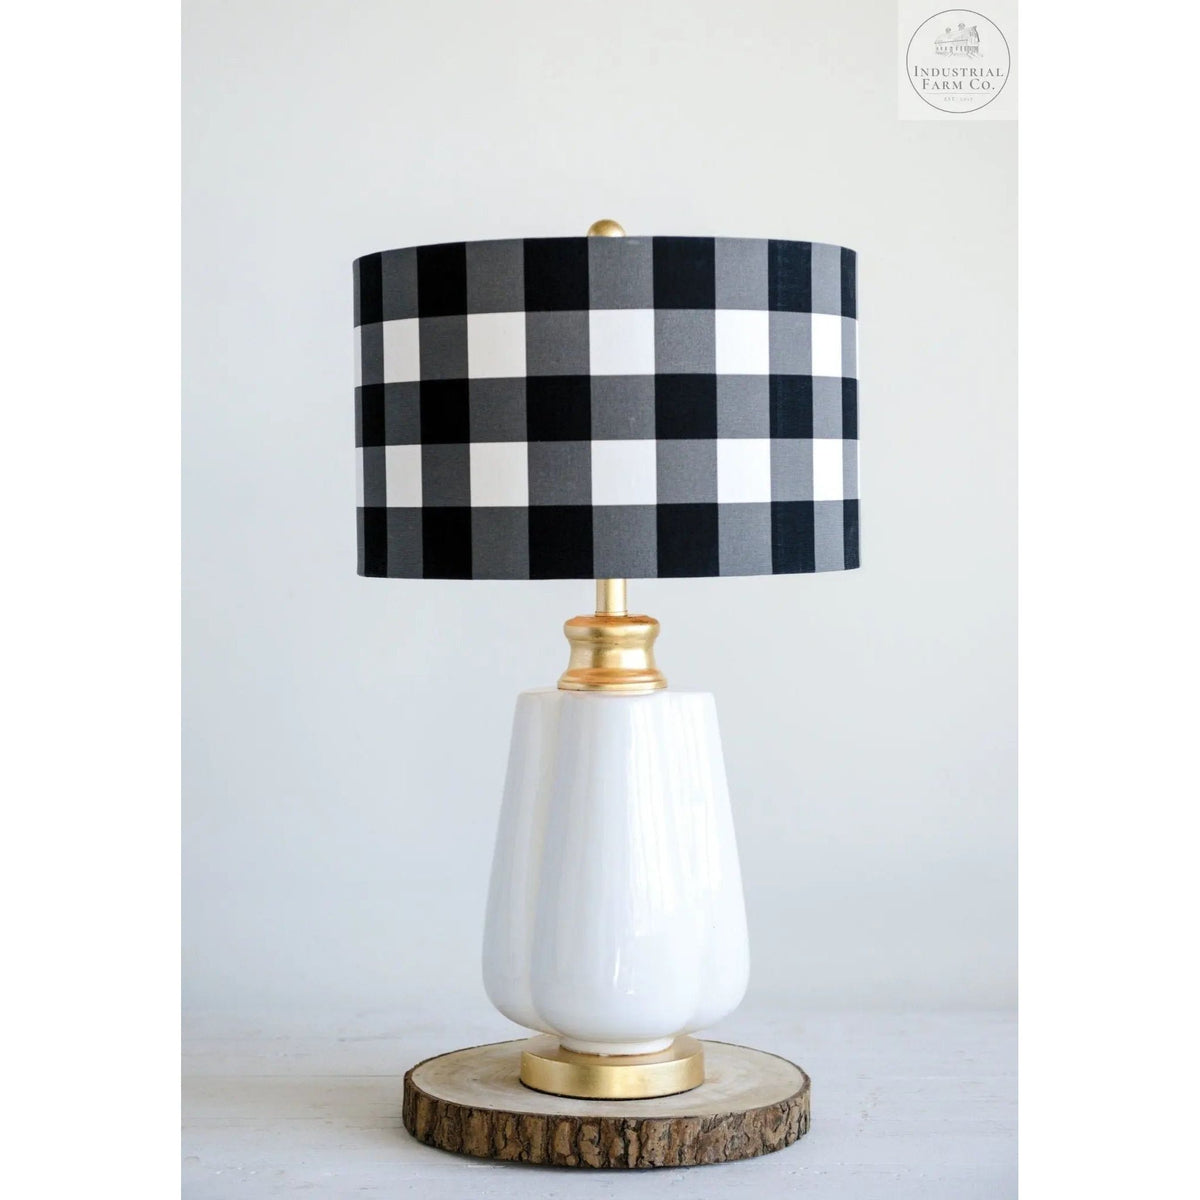 The Carrie Style Table Lamp  Default Title   | Industrial Farm Co